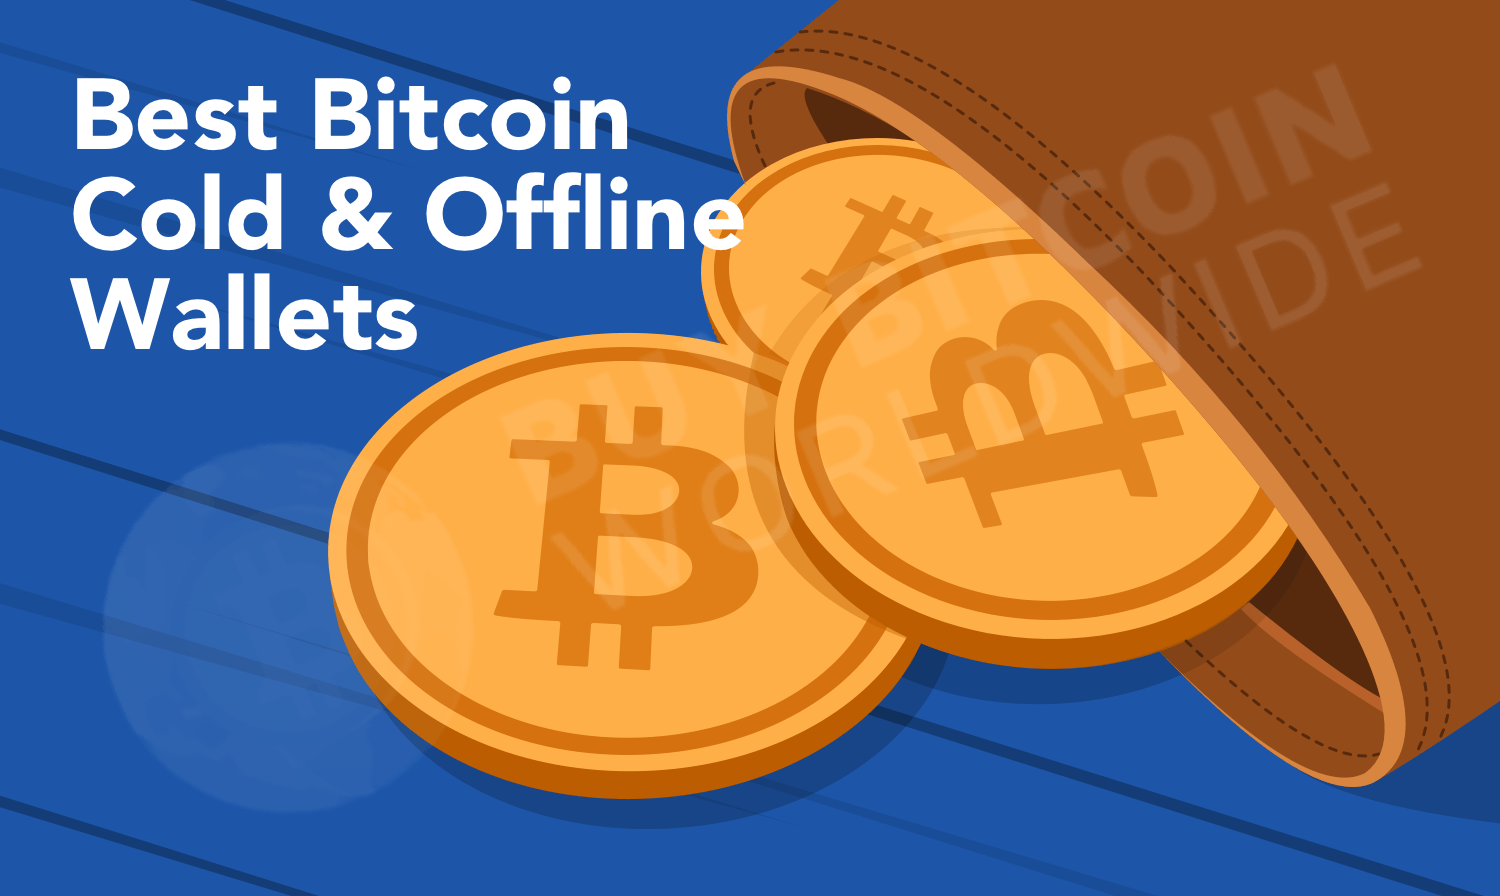 Bitcoin Cold Storage Guide: Learn How To Store Bitcoin Offline